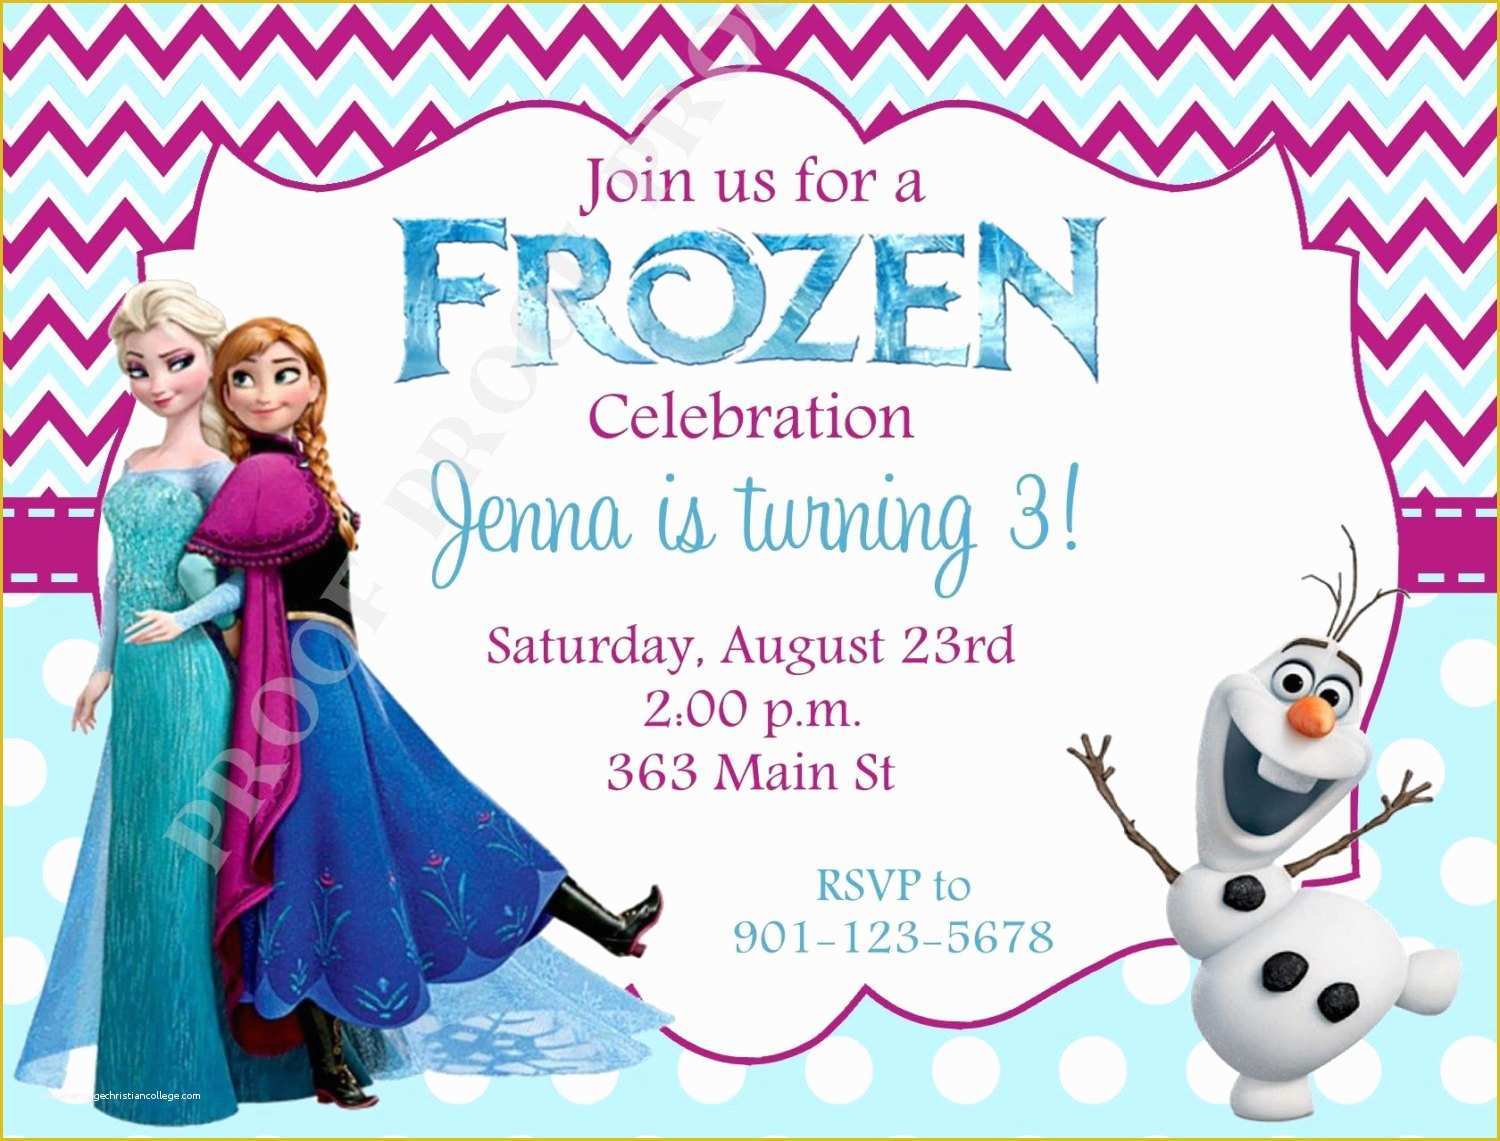 Free Printable Frozen Invitations Templates Of 10 Printed Frozen Invitations with Envelopes Free Return